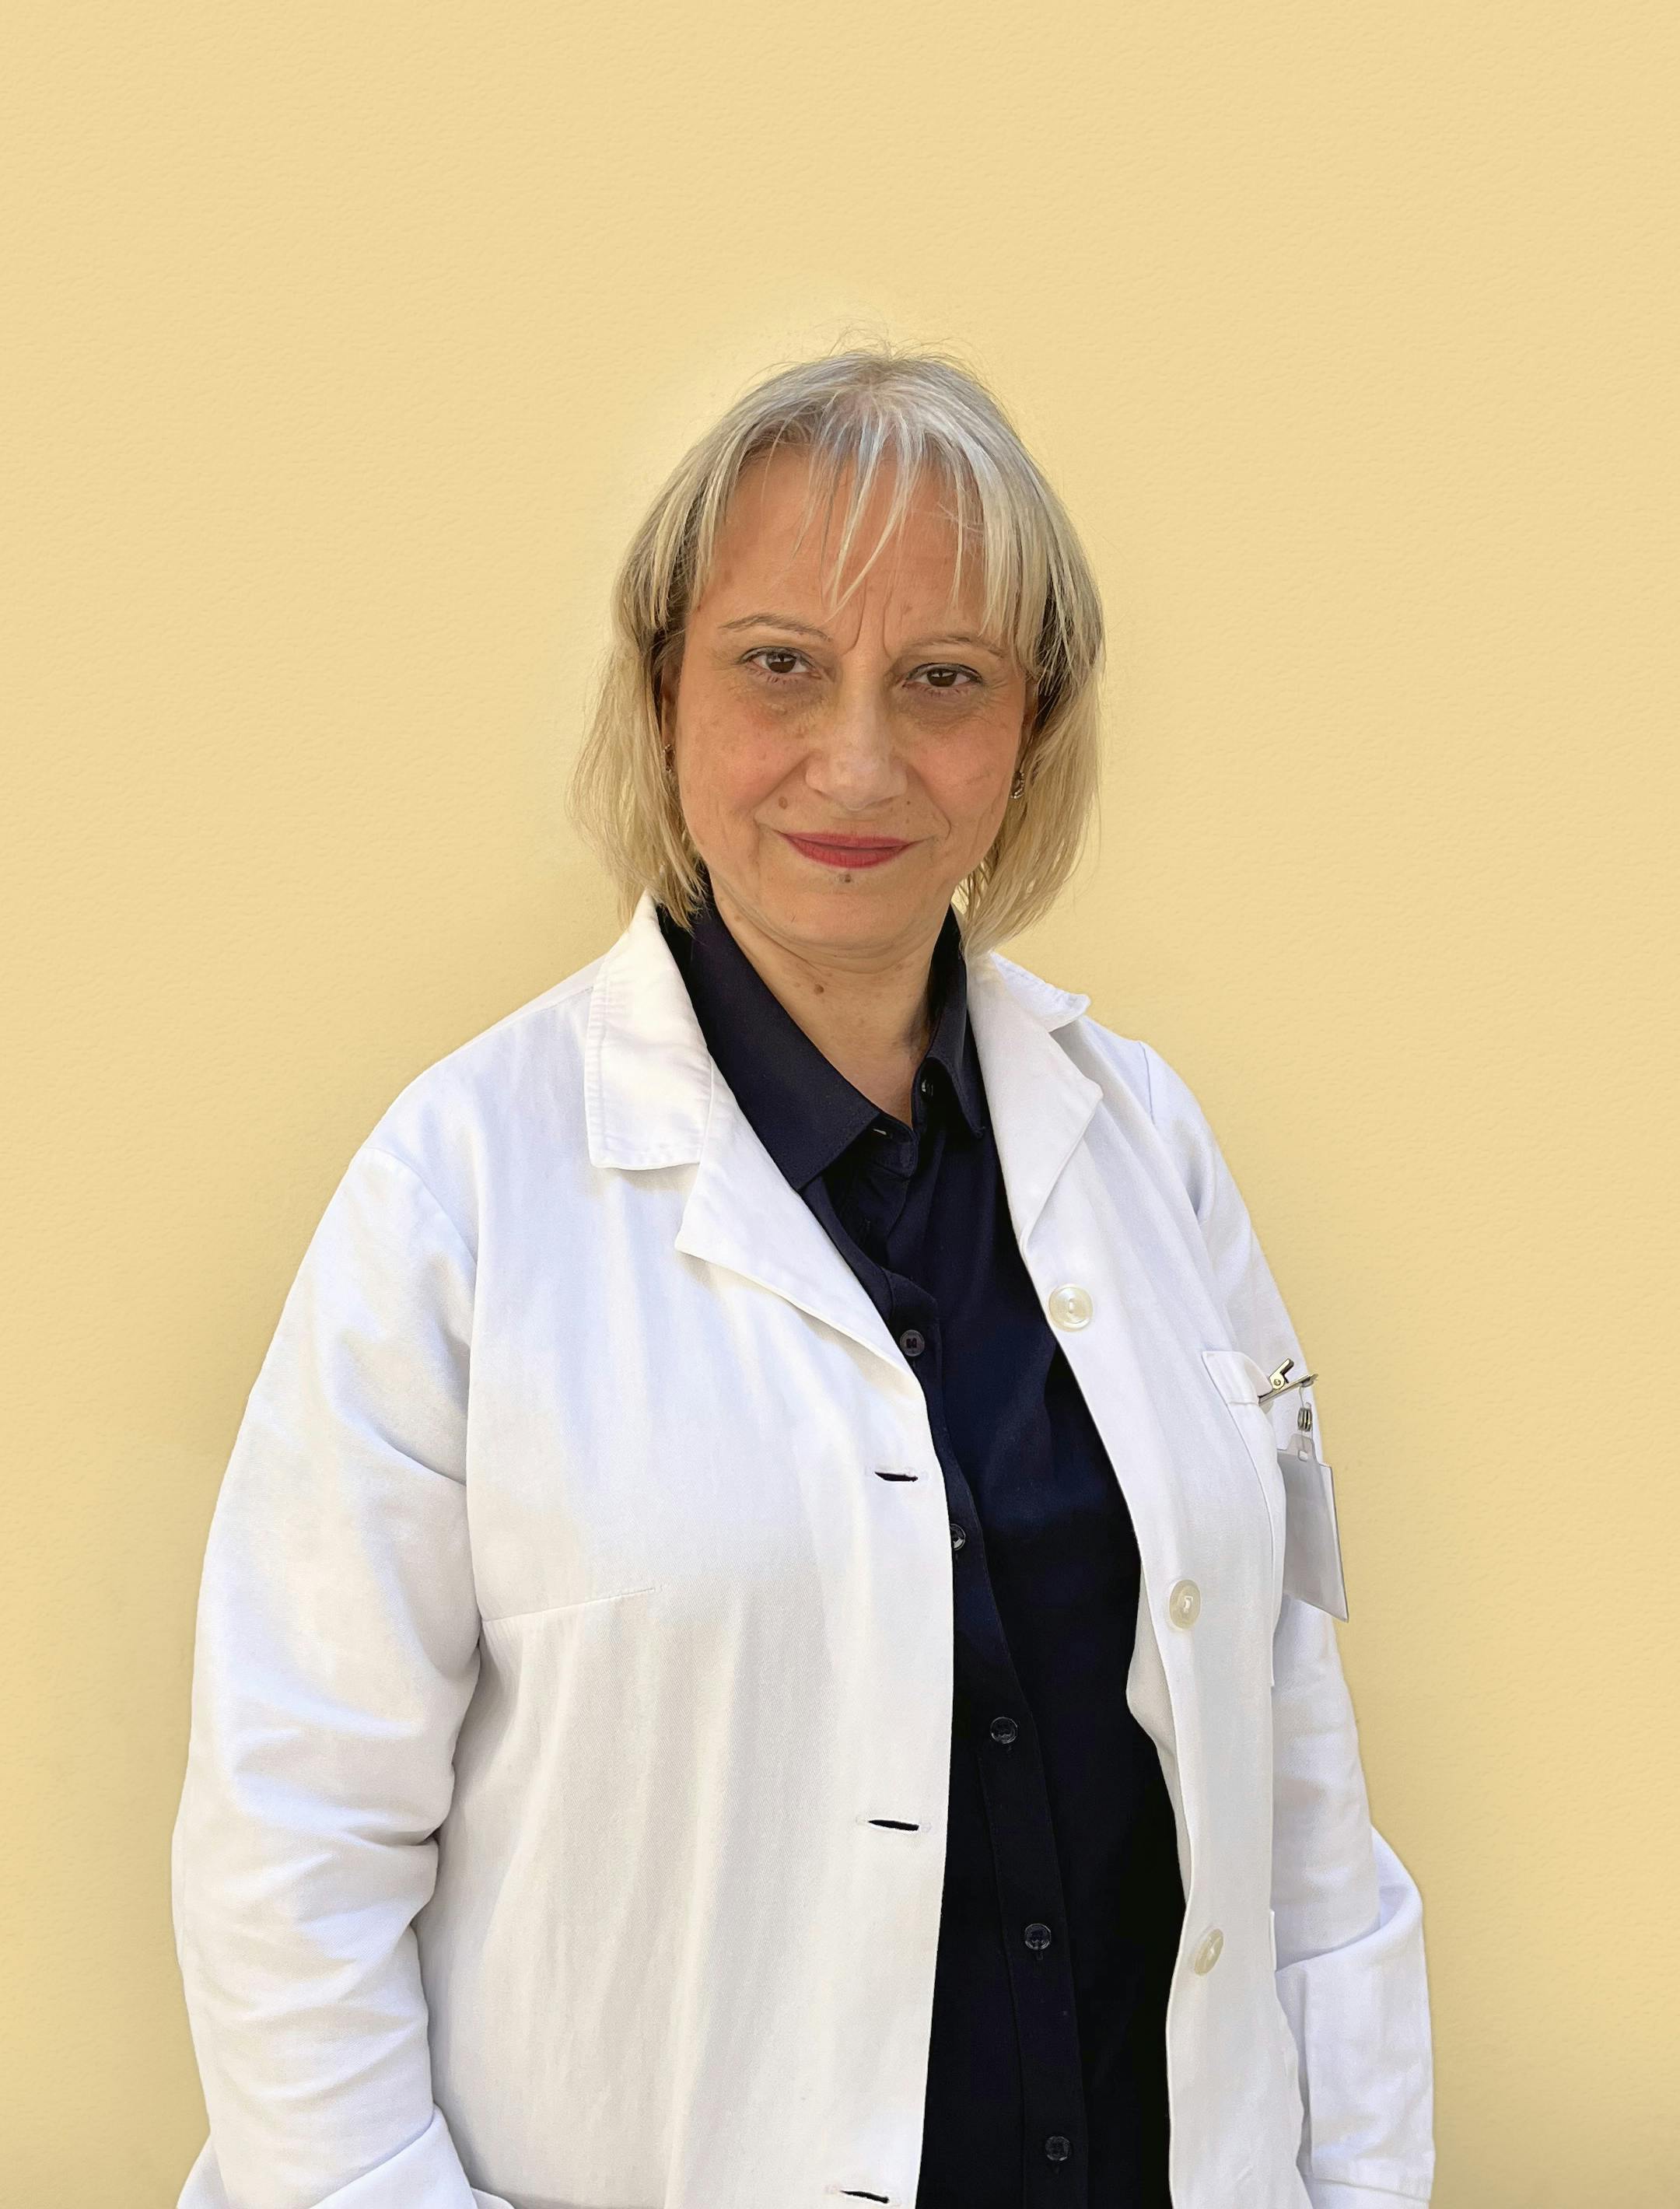 Middle-aged woman with bob blond hair, white doctor's coat and dark blue shirt slightly smiling looking directly at the camera.